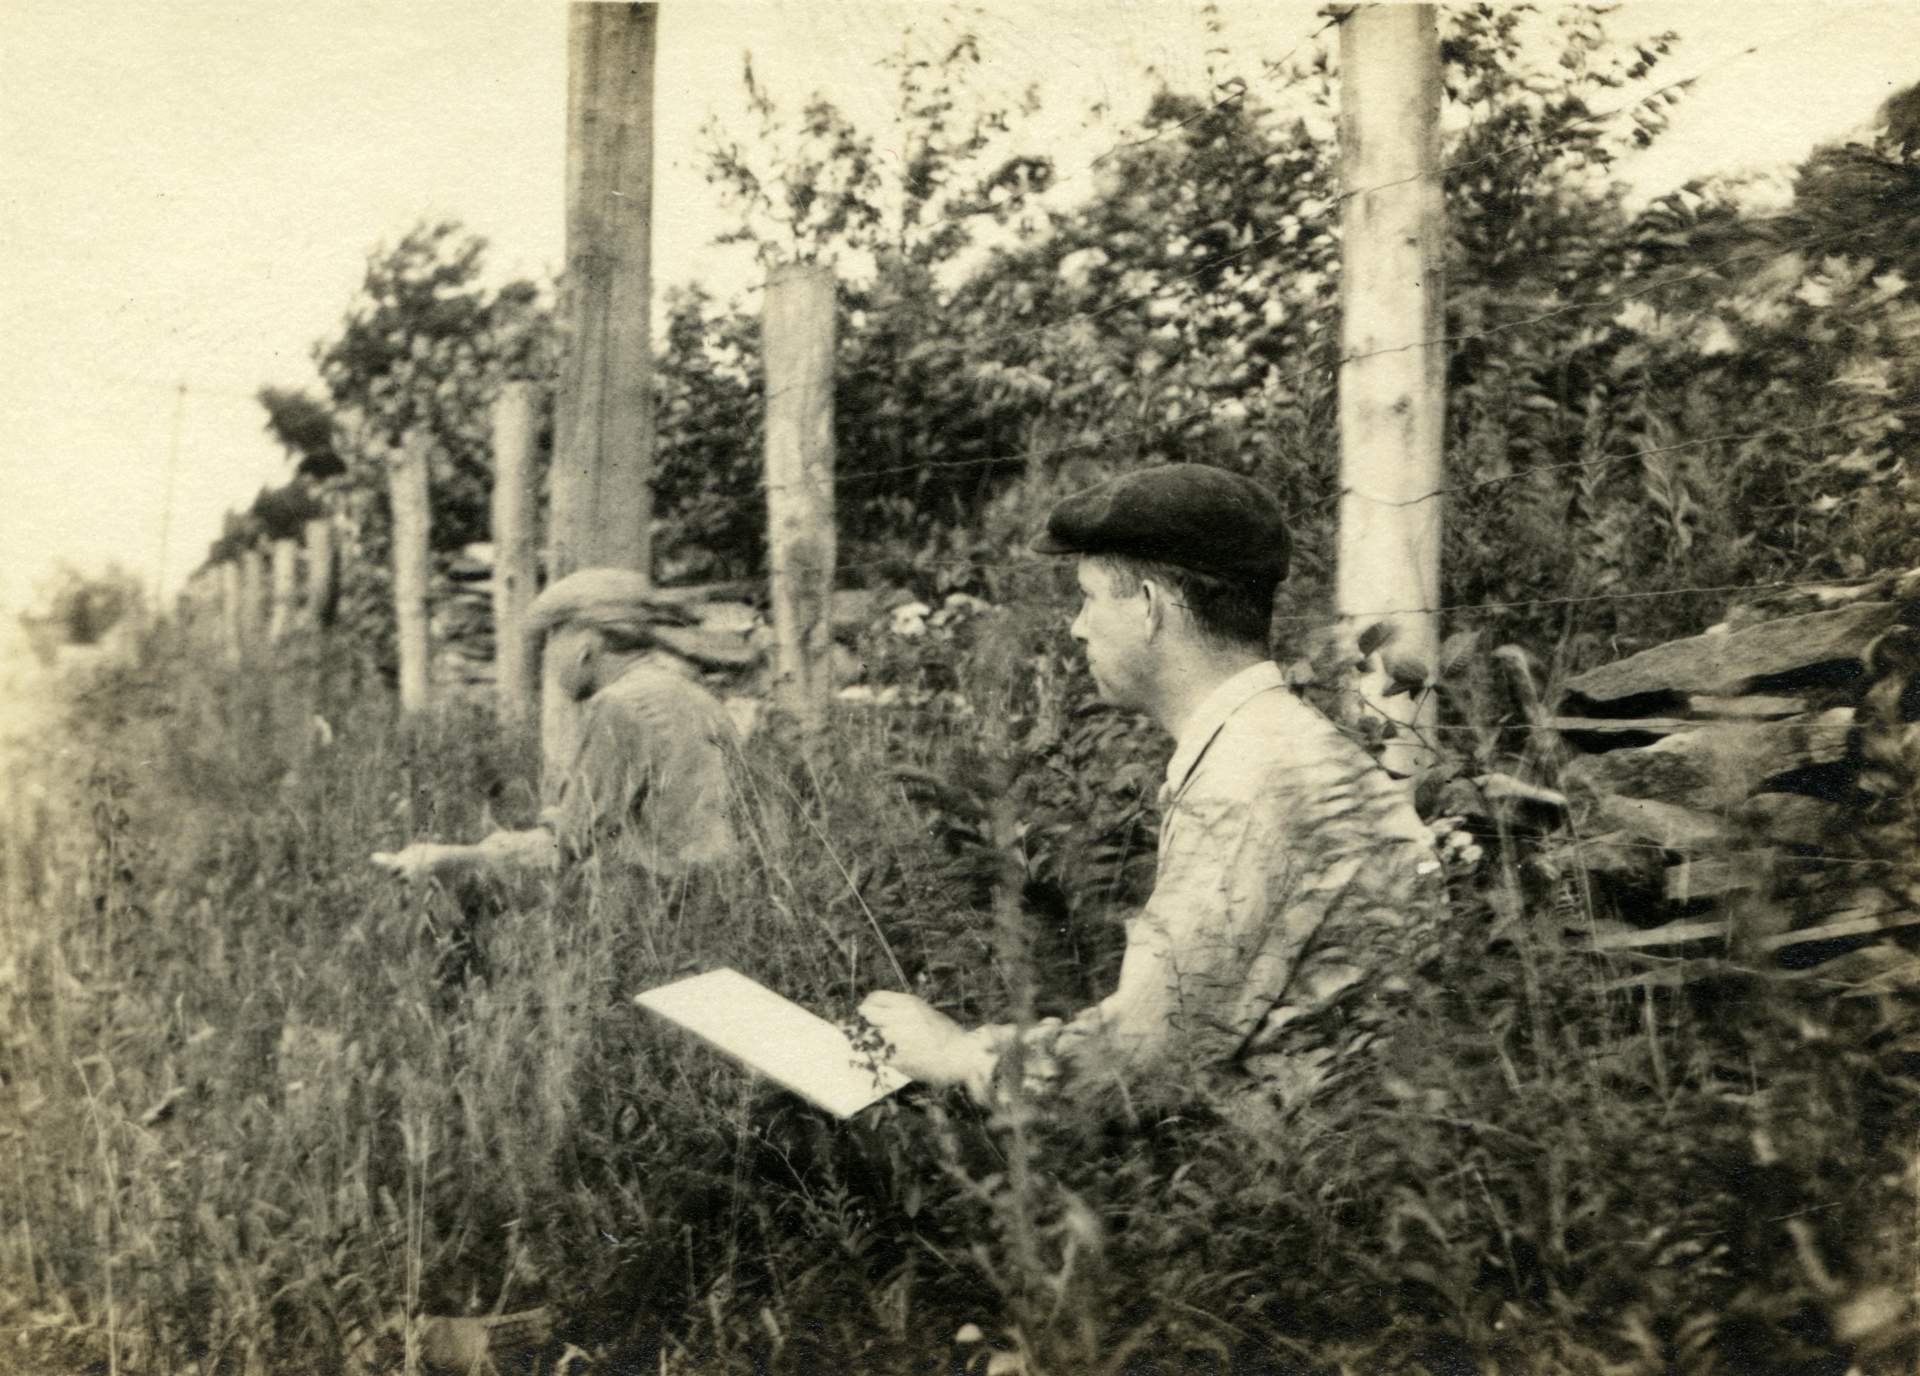 Untitled (Burchfield sketching in a field, likely on the trip with J. J. Lankes and William J. Schwanekamp to visit Robert Frost in Vermont, August 4-10, 1924